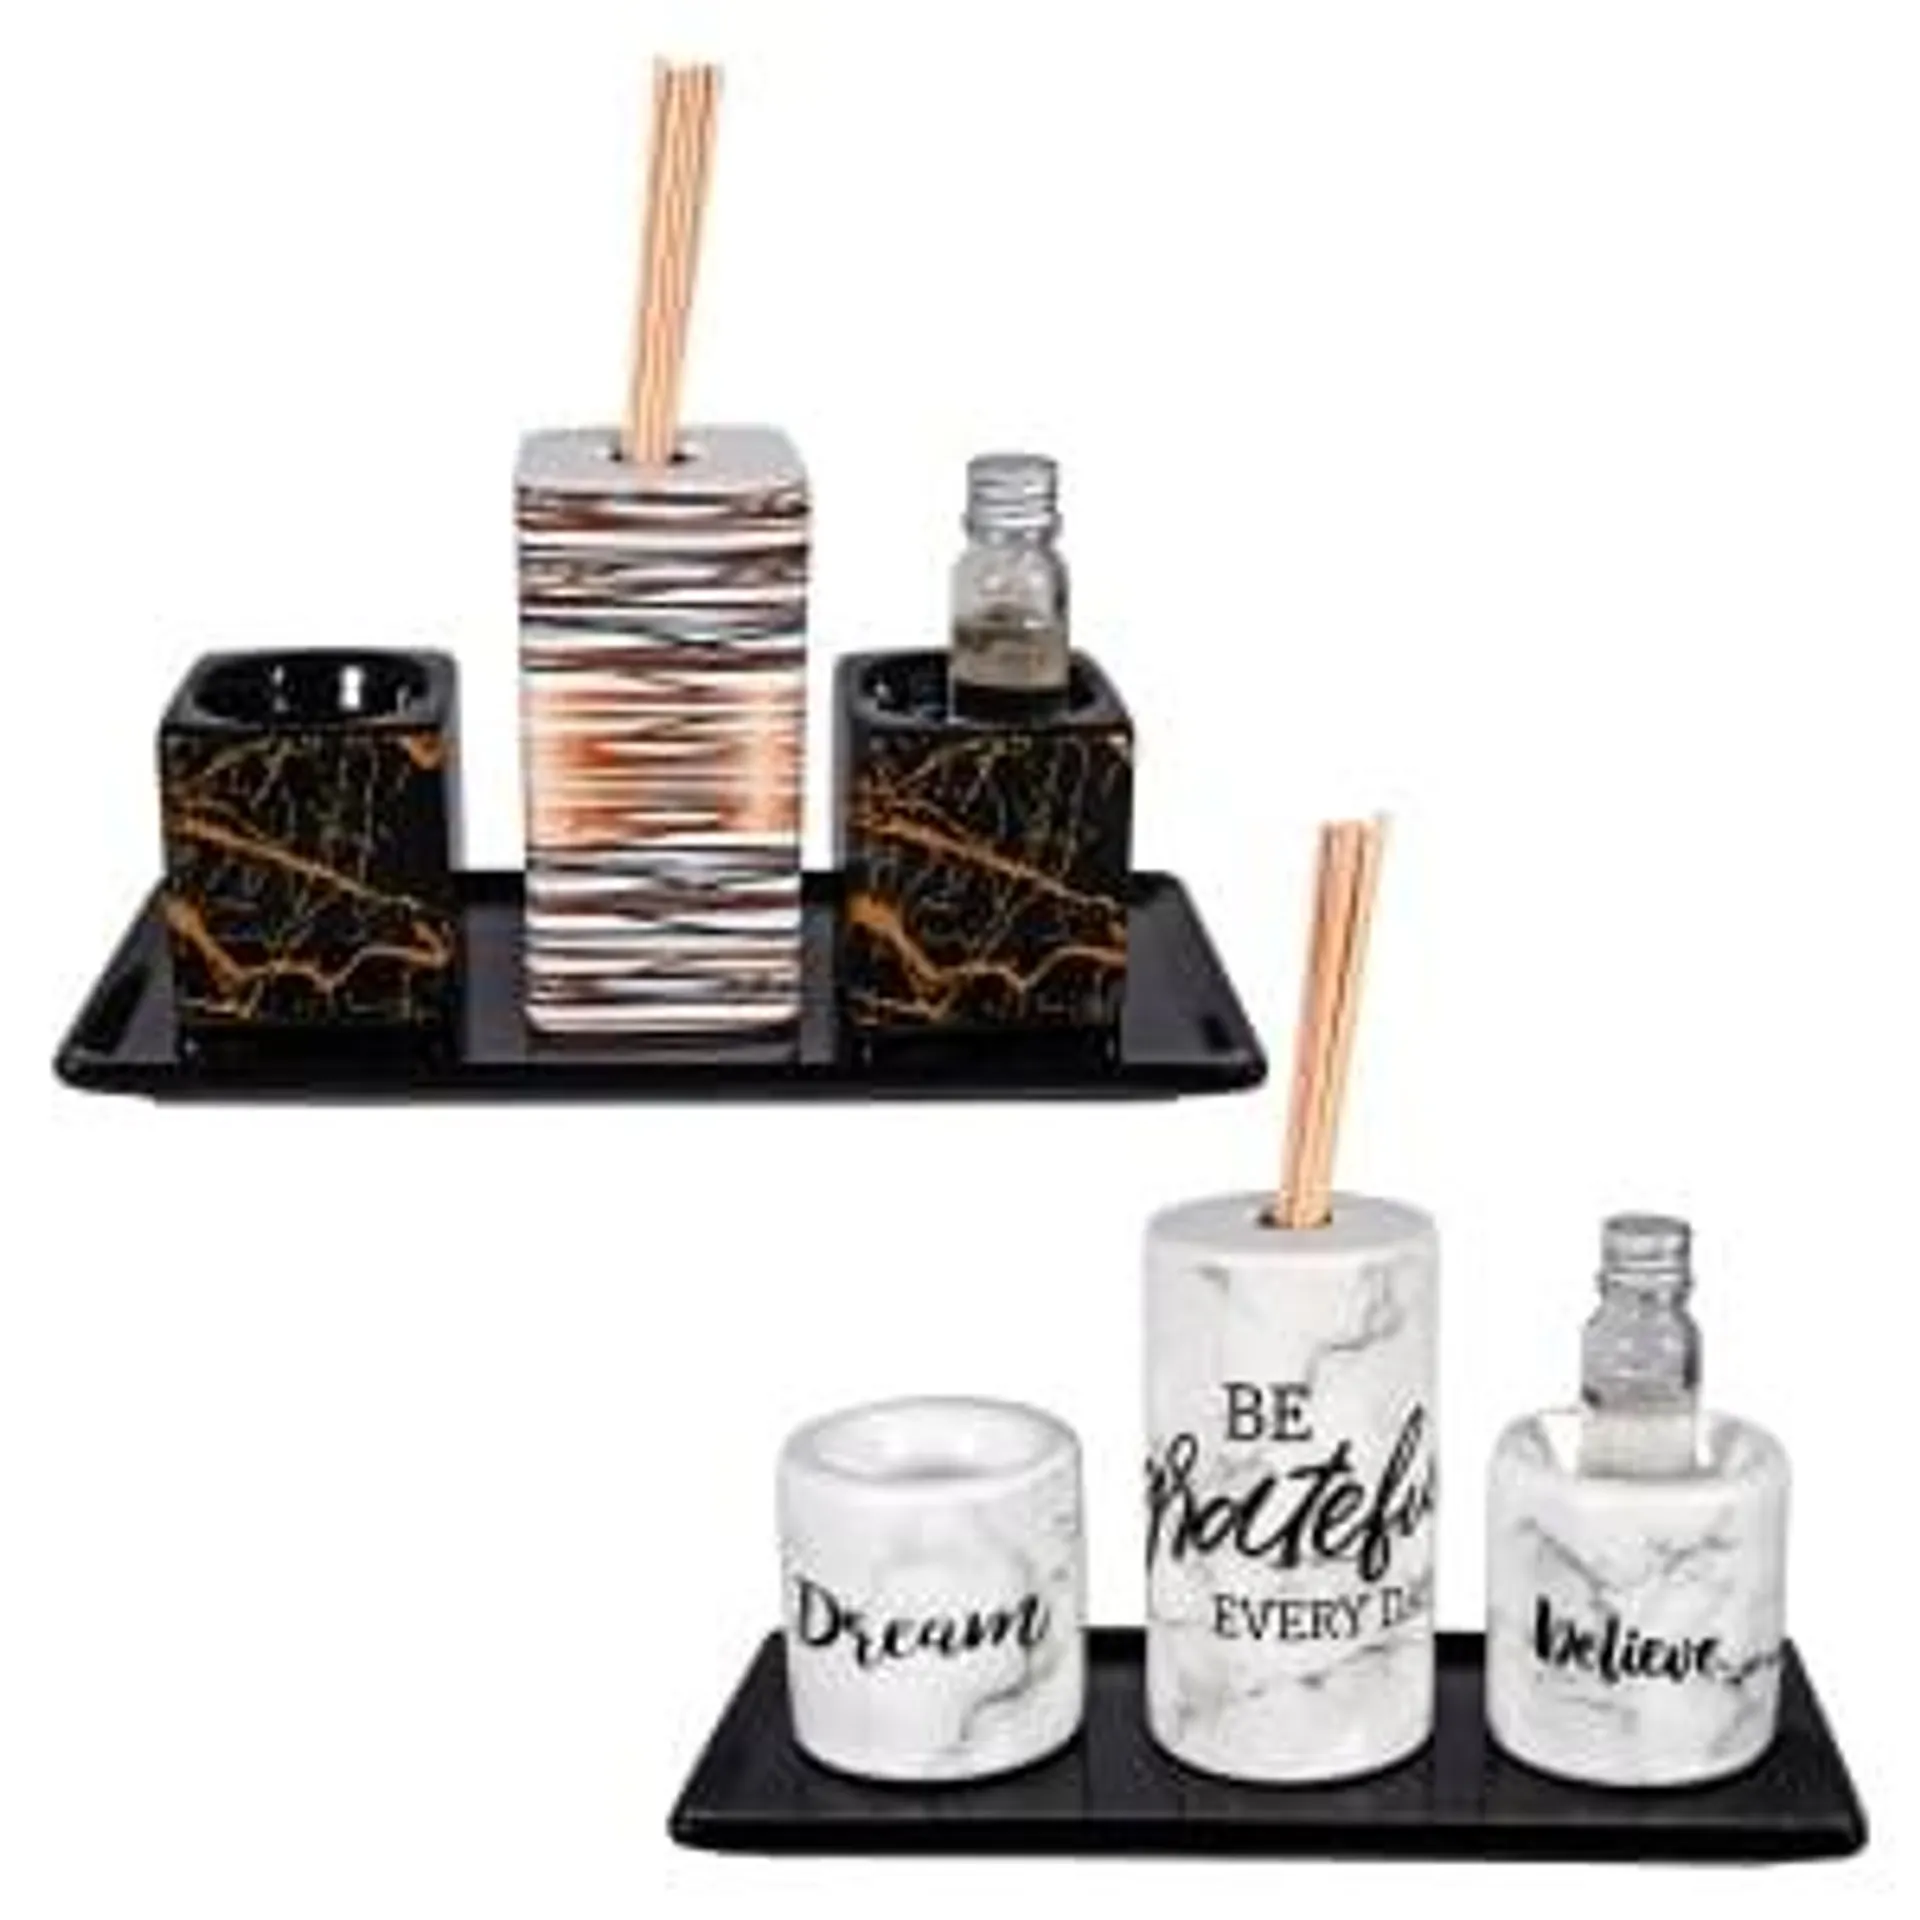 BellaVilla Living Scented Reed Diffuser Sets, 12 pc.